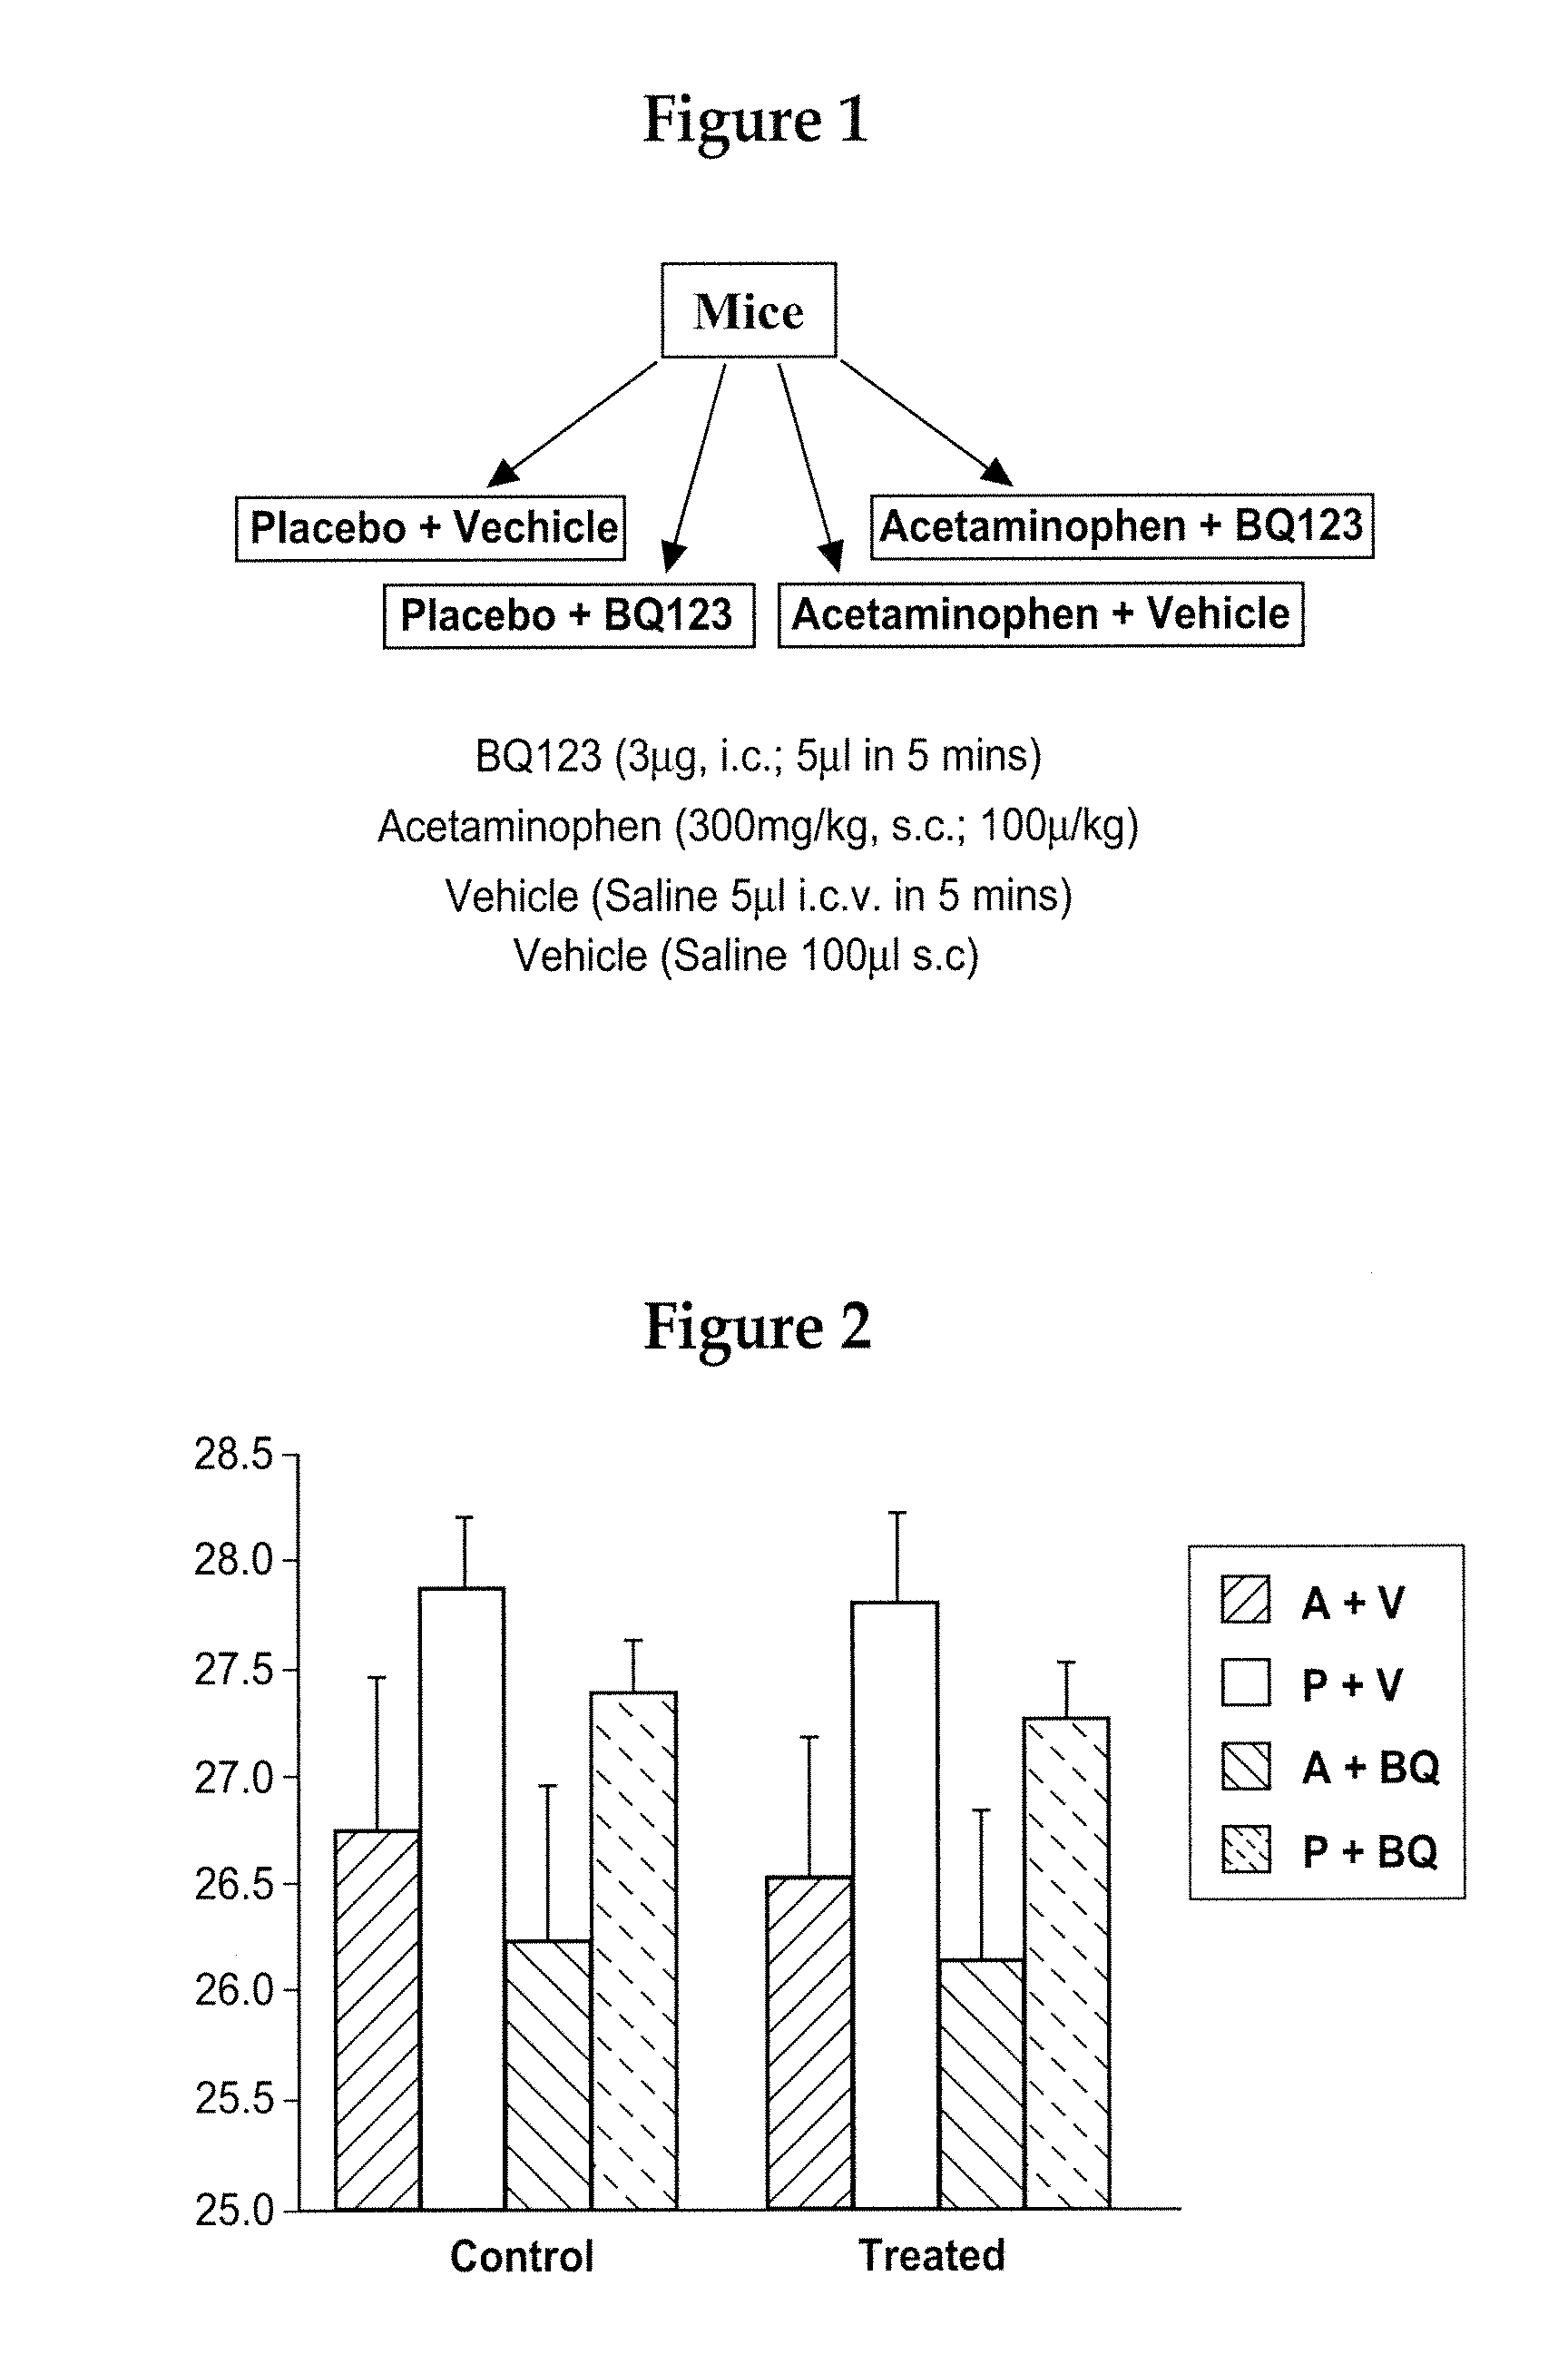 Method and Composition for Potentiating the Antipyretic Action of a Nonopiod Analgesic